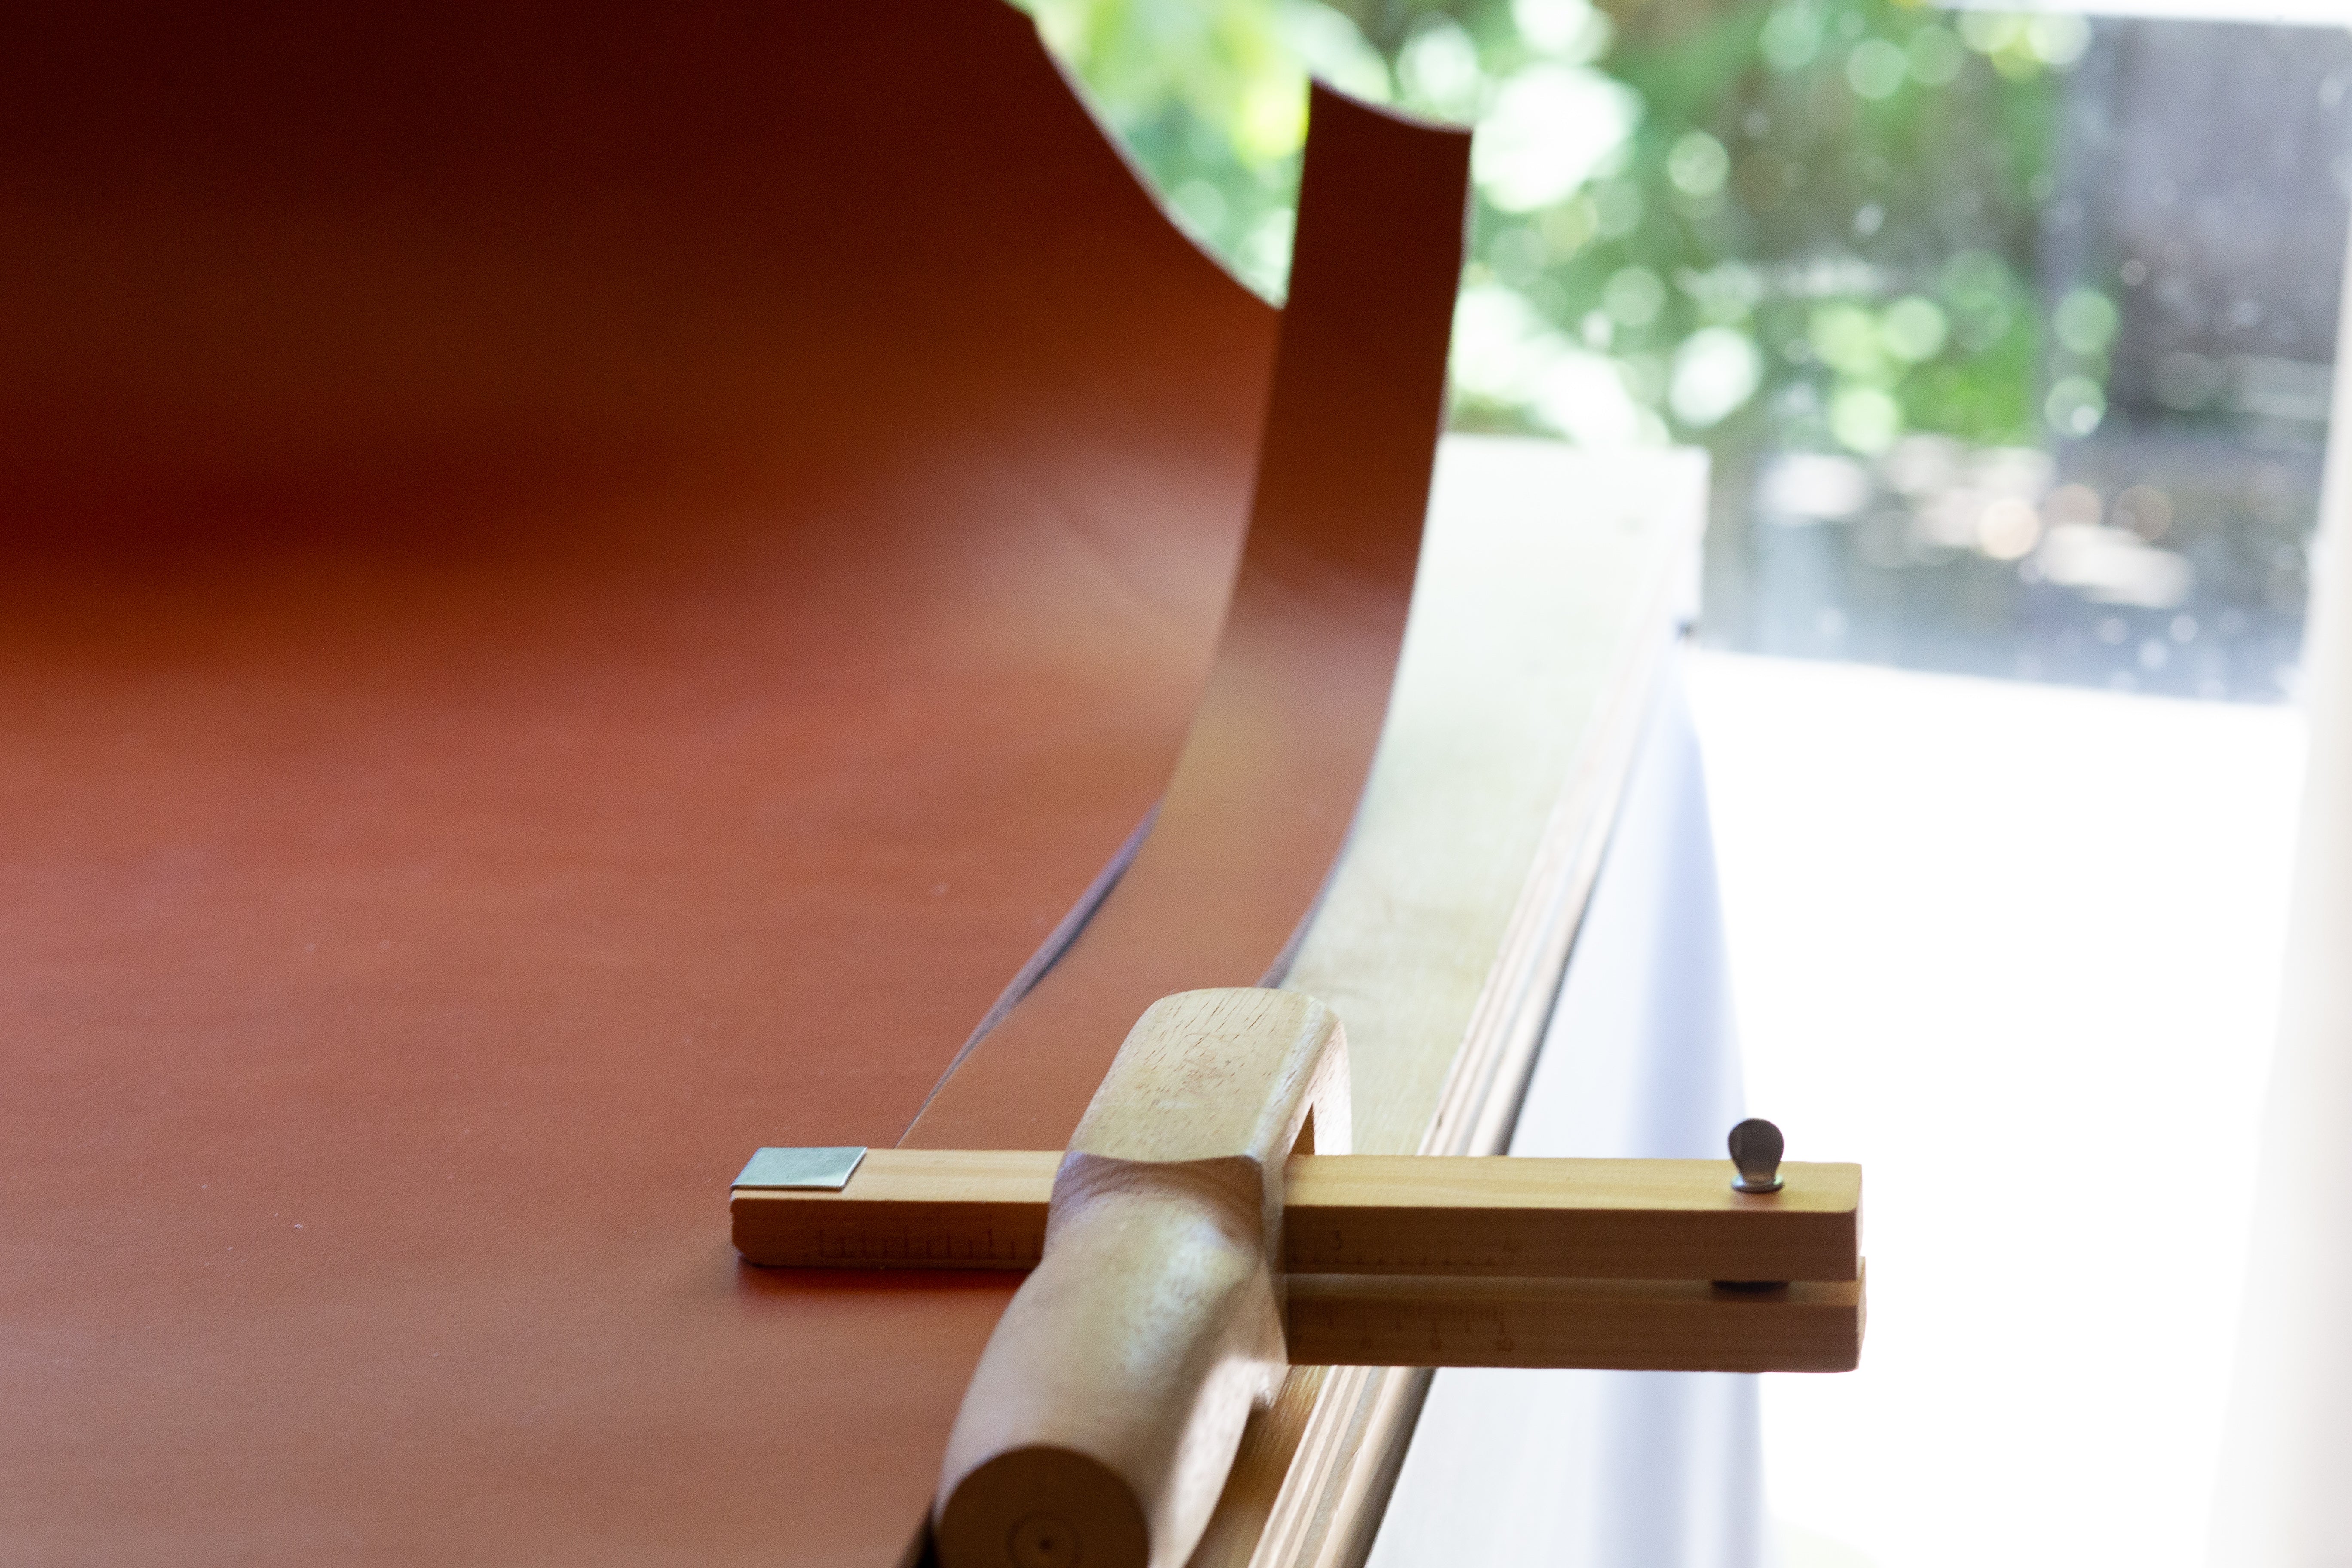 Cutting a Strap of Leather From Wickett & Craig "English" Bridle Leather